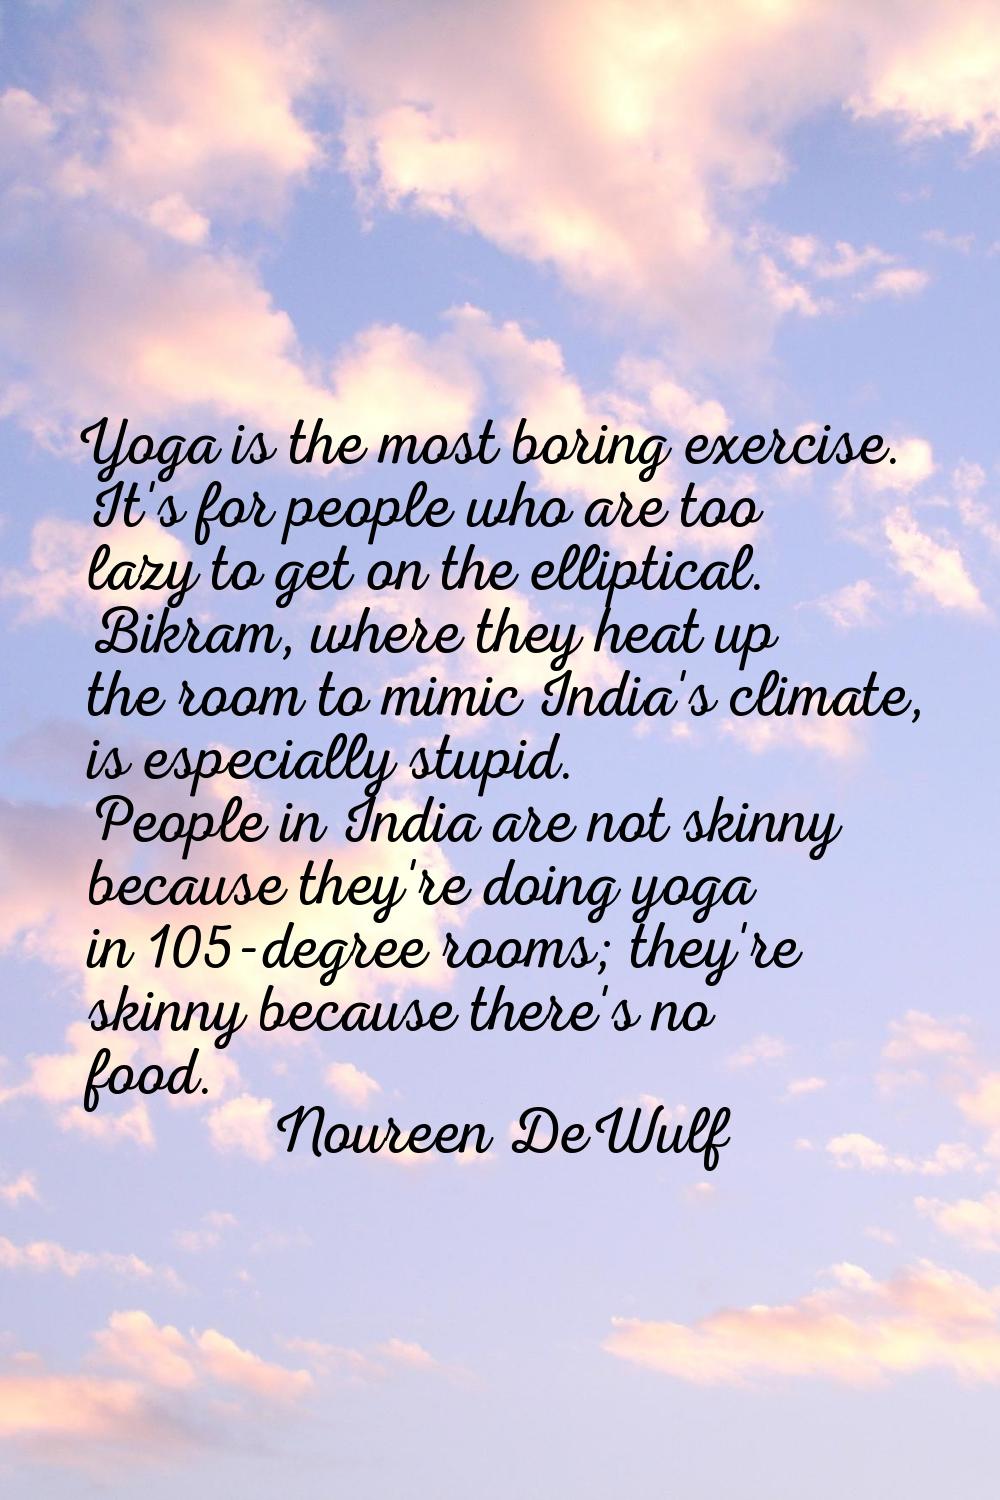 Yoga is the most boring exercise. It's for people who are too lazy to get on the elliptical. Bikram